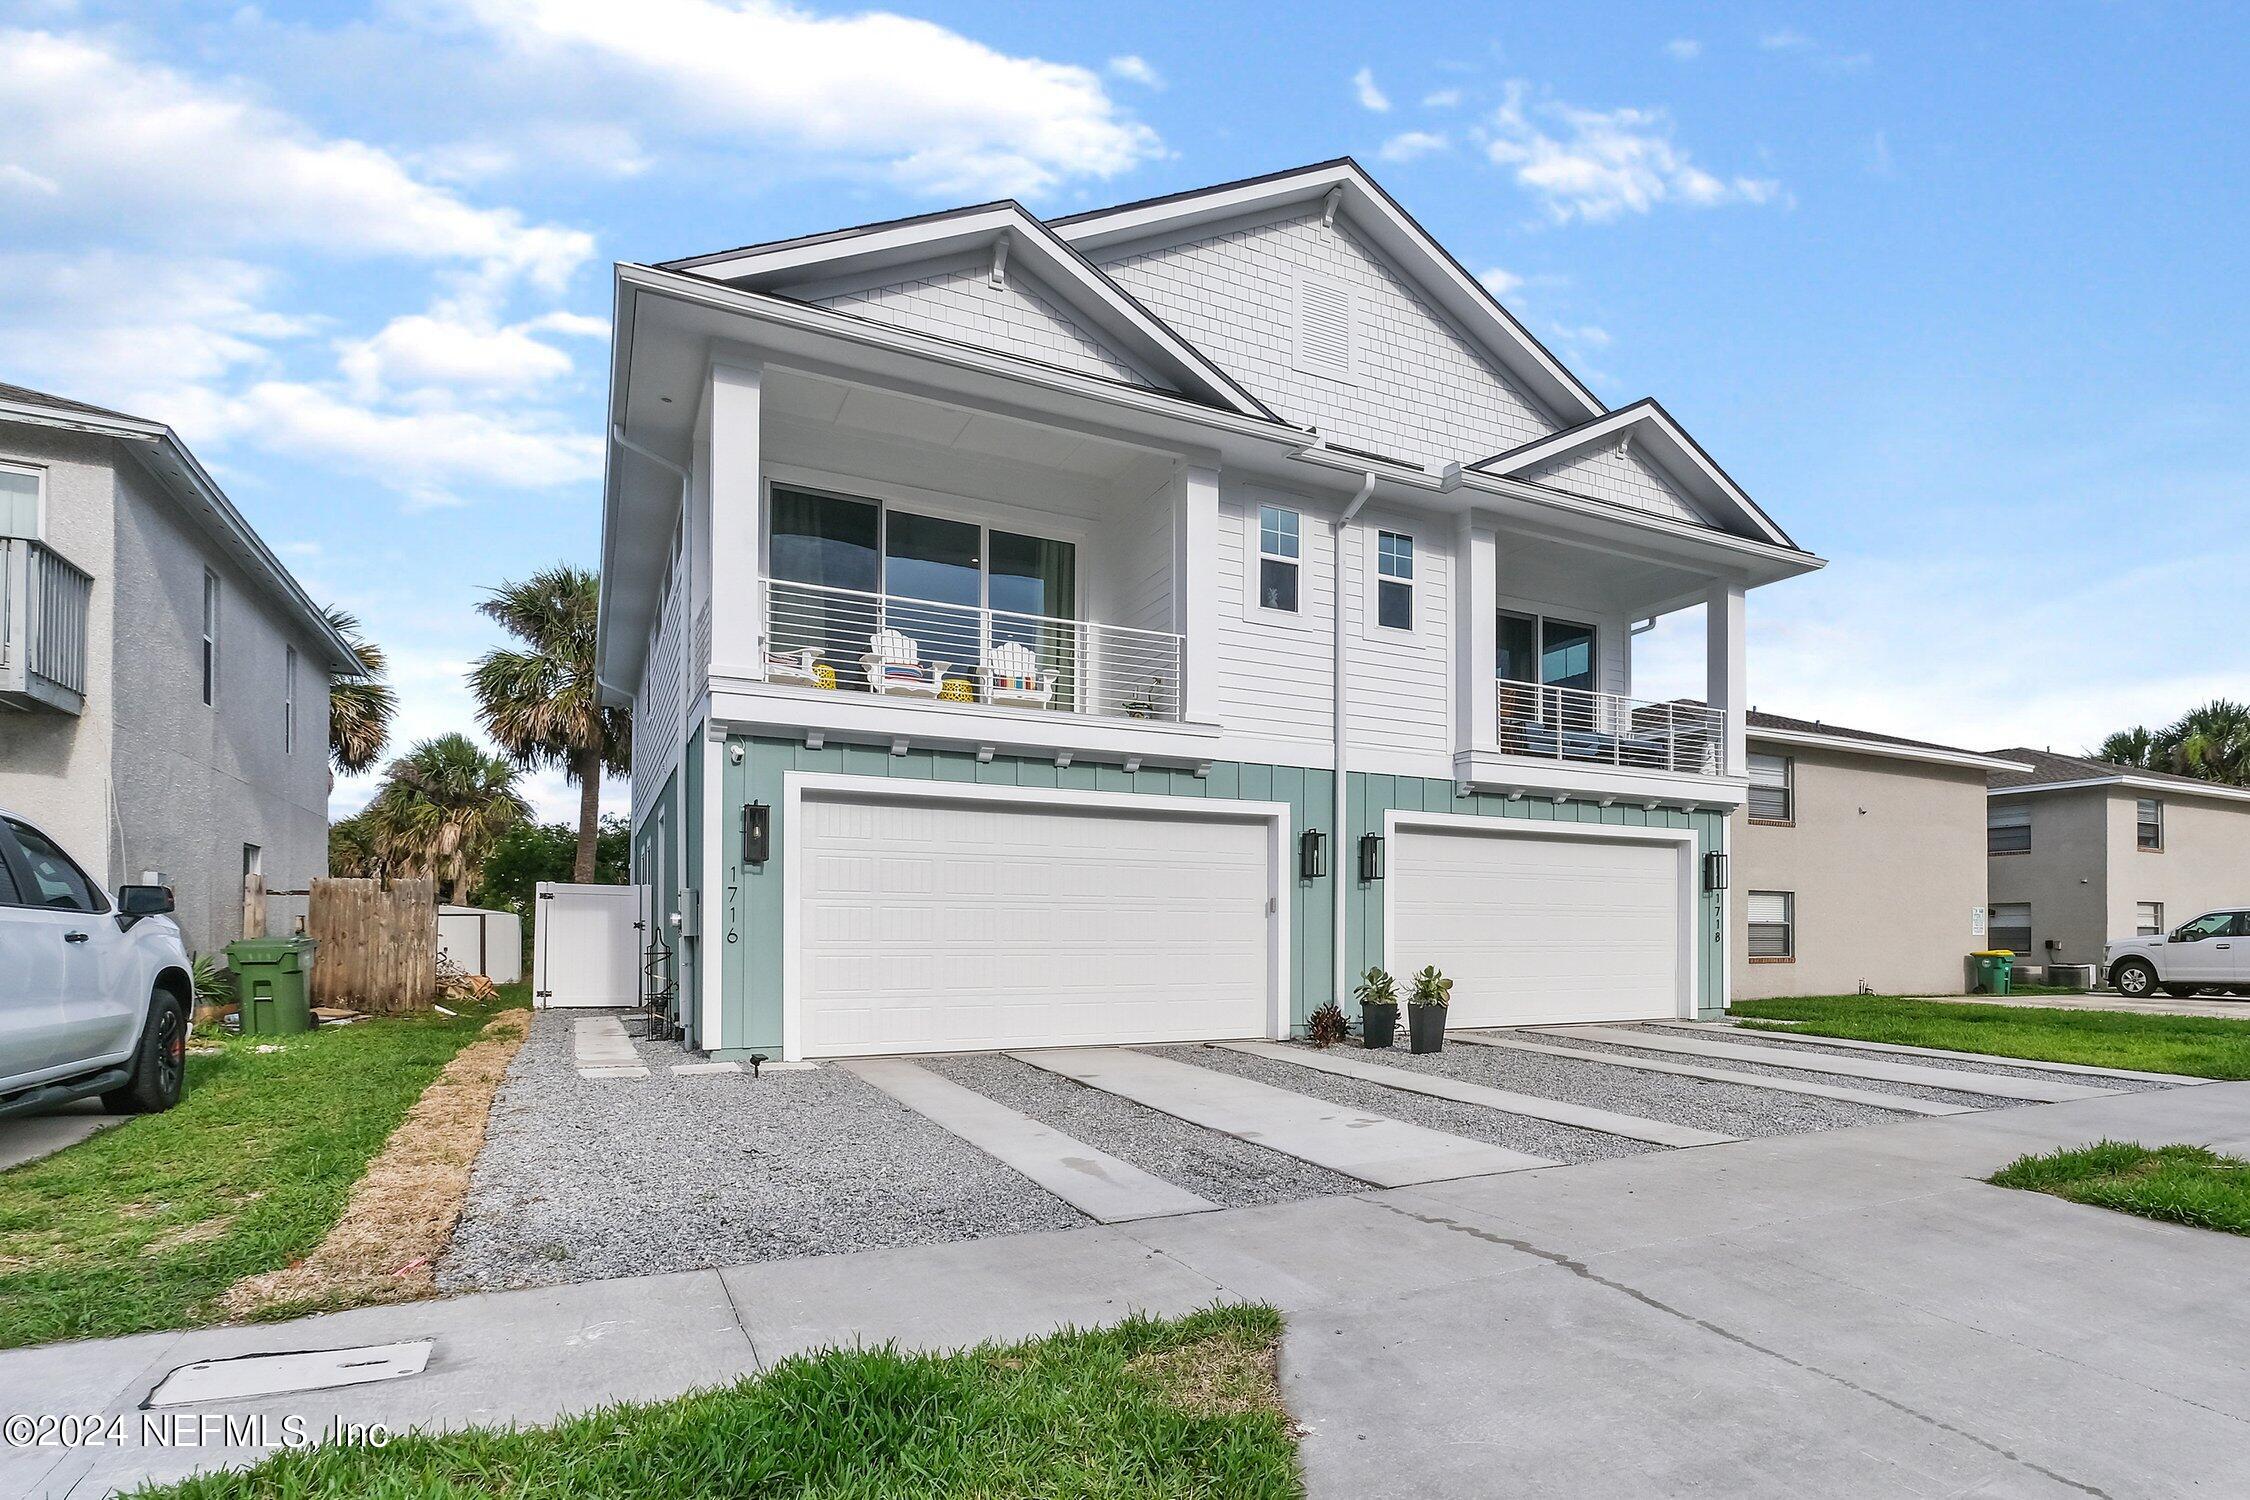 Jacksonville Beach, FL home for sale located at 1716 2nd Street N, Jacksonville Beach, FL 32250